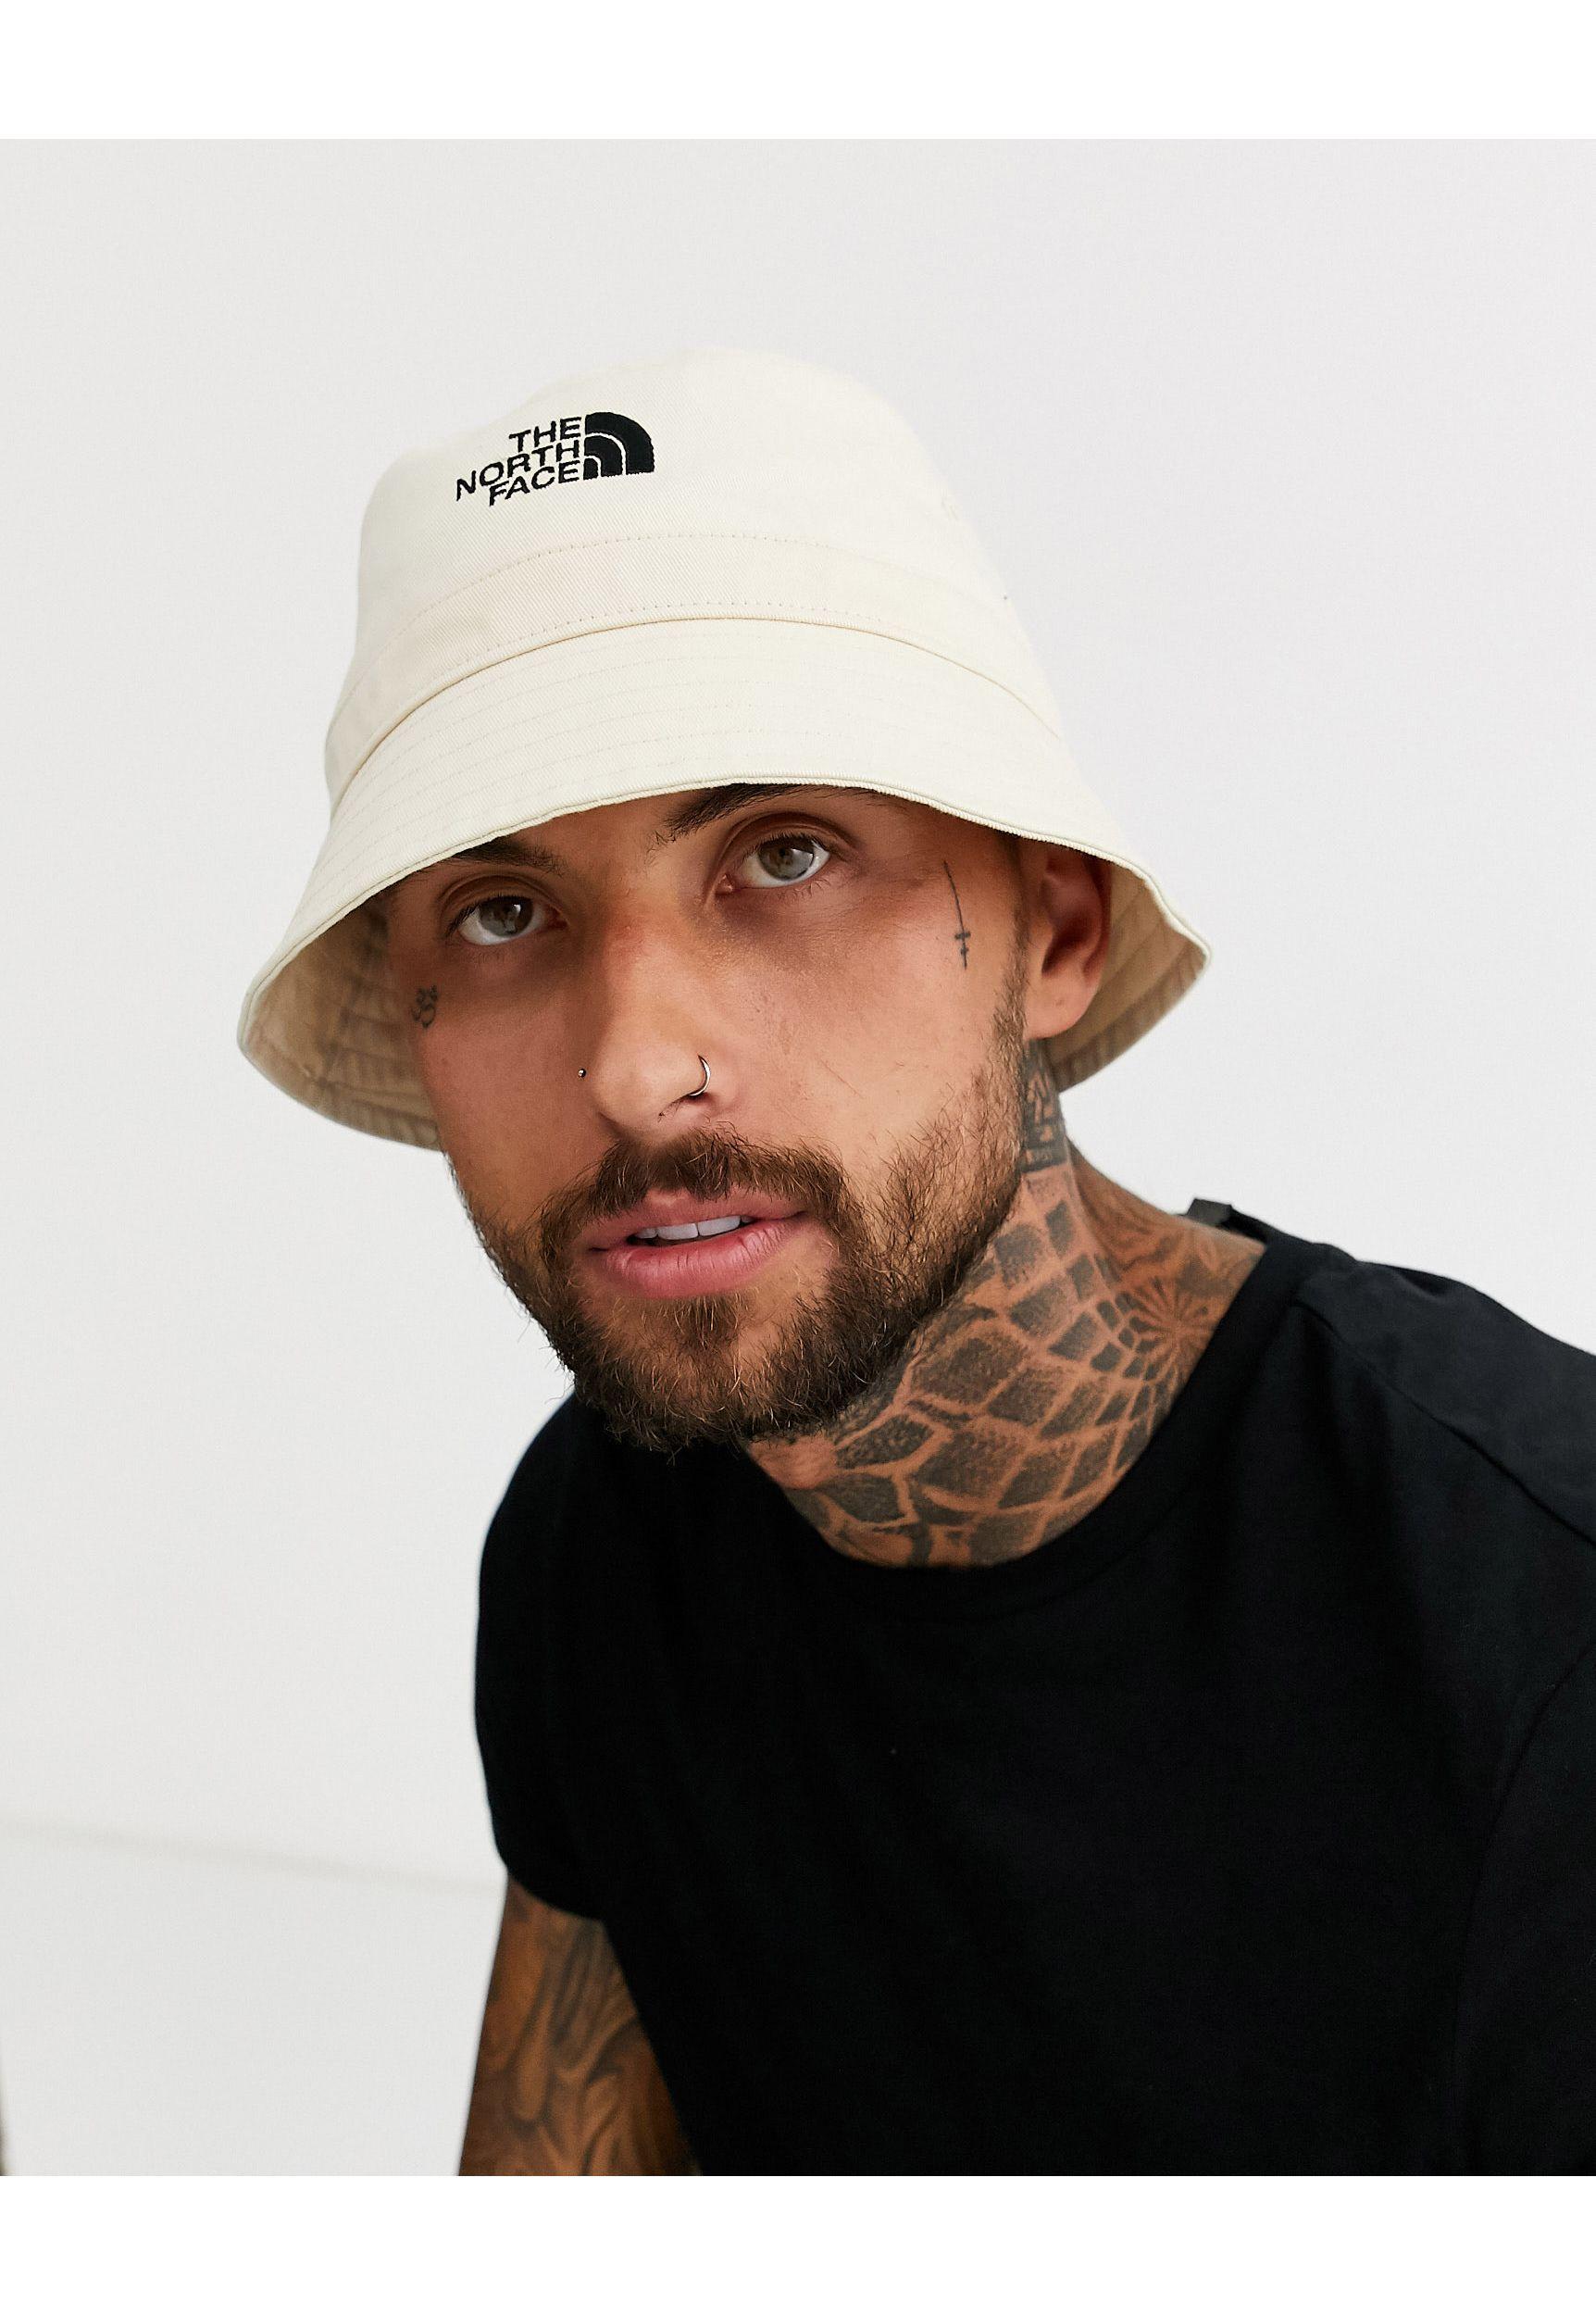 The North Face Cotton Bucket Hat in White for Men - Lyst